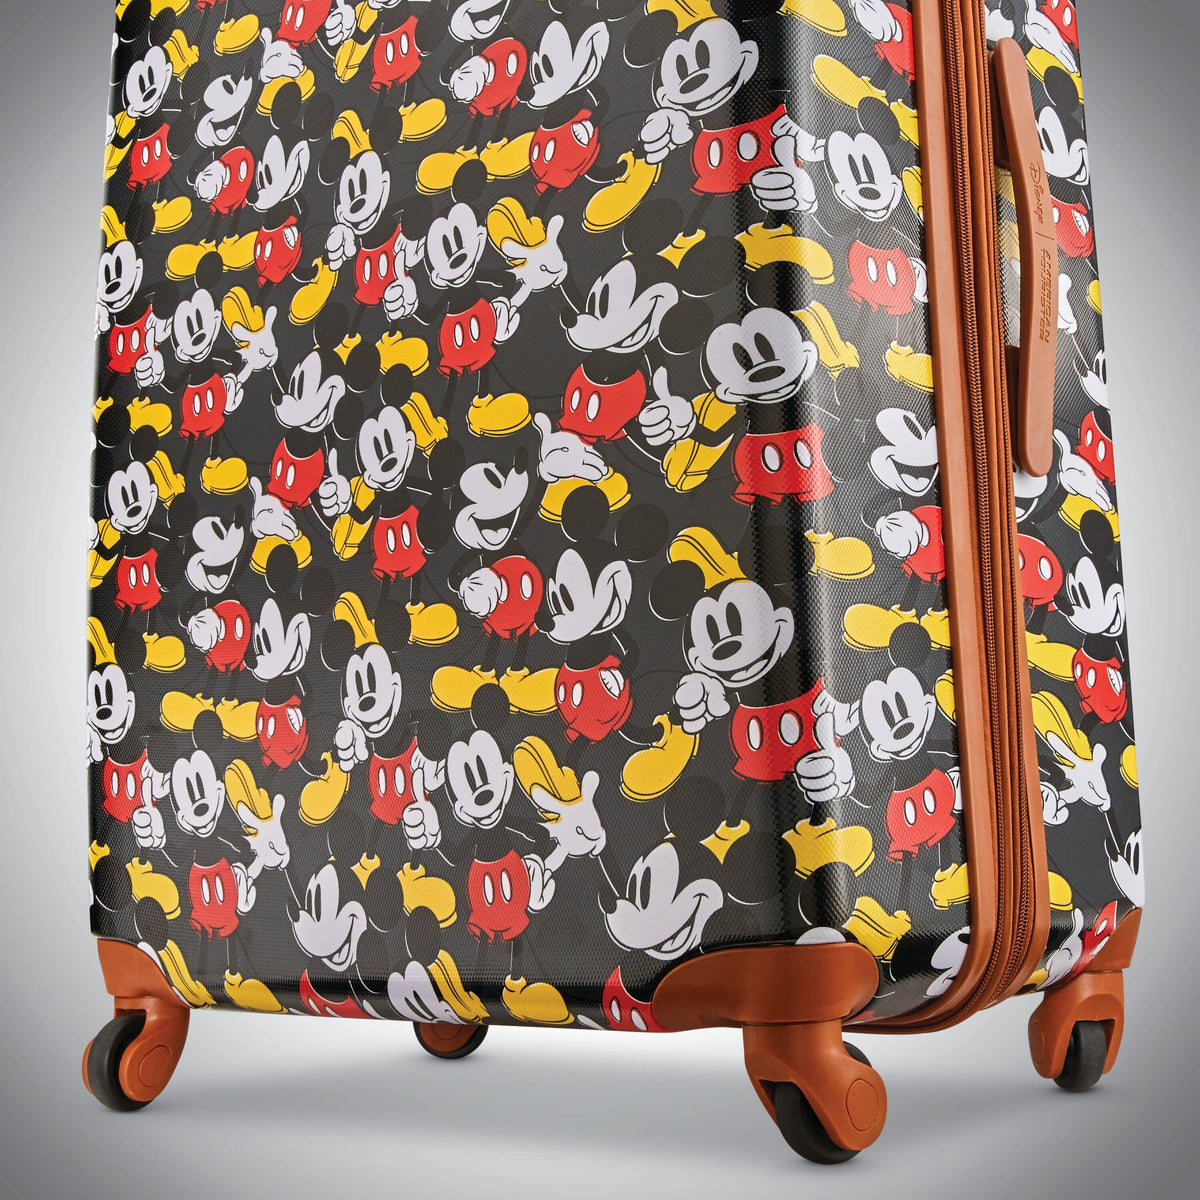 American Tourister Disney All Ages Hardside 20" Spinner Luggage